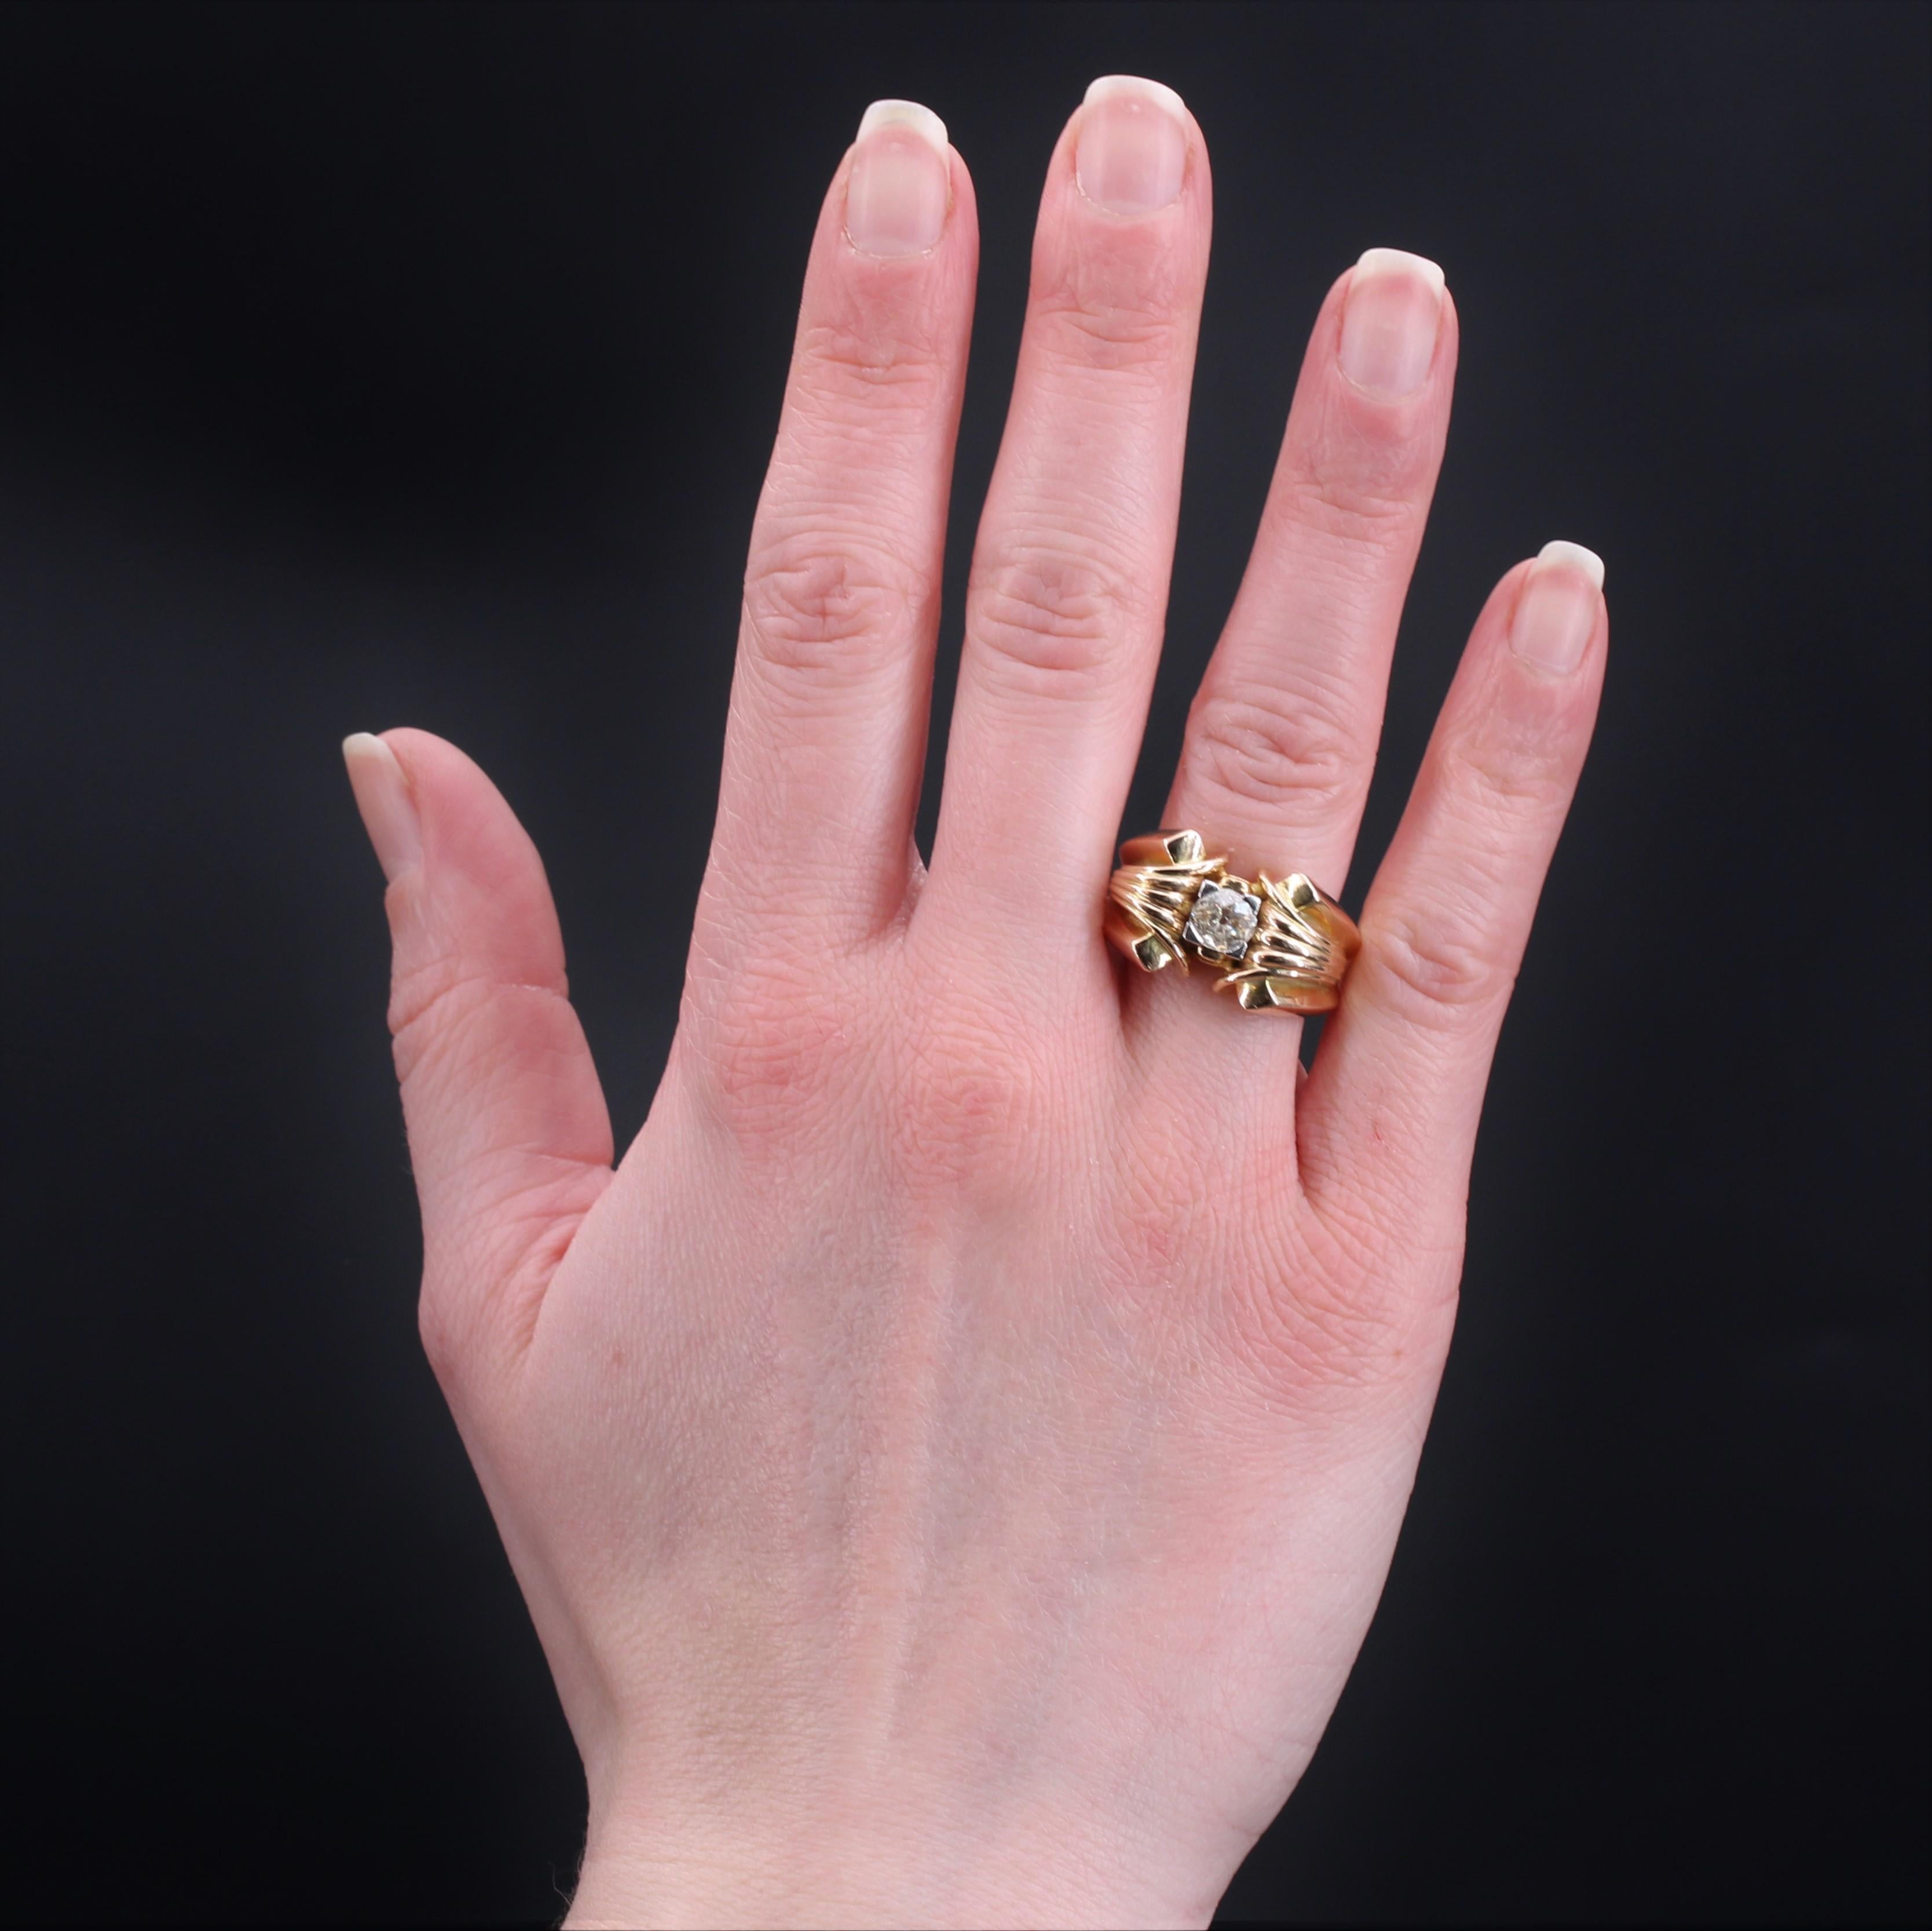 Ring in 18 karat yellow gold.
Massive tank ring, its ring is openworked on the side then decorated with a fan-shaped pattern on both sides. In the center an antique brilliant- cut diamond is set with claws of platinum.
Total weight of the diamond :